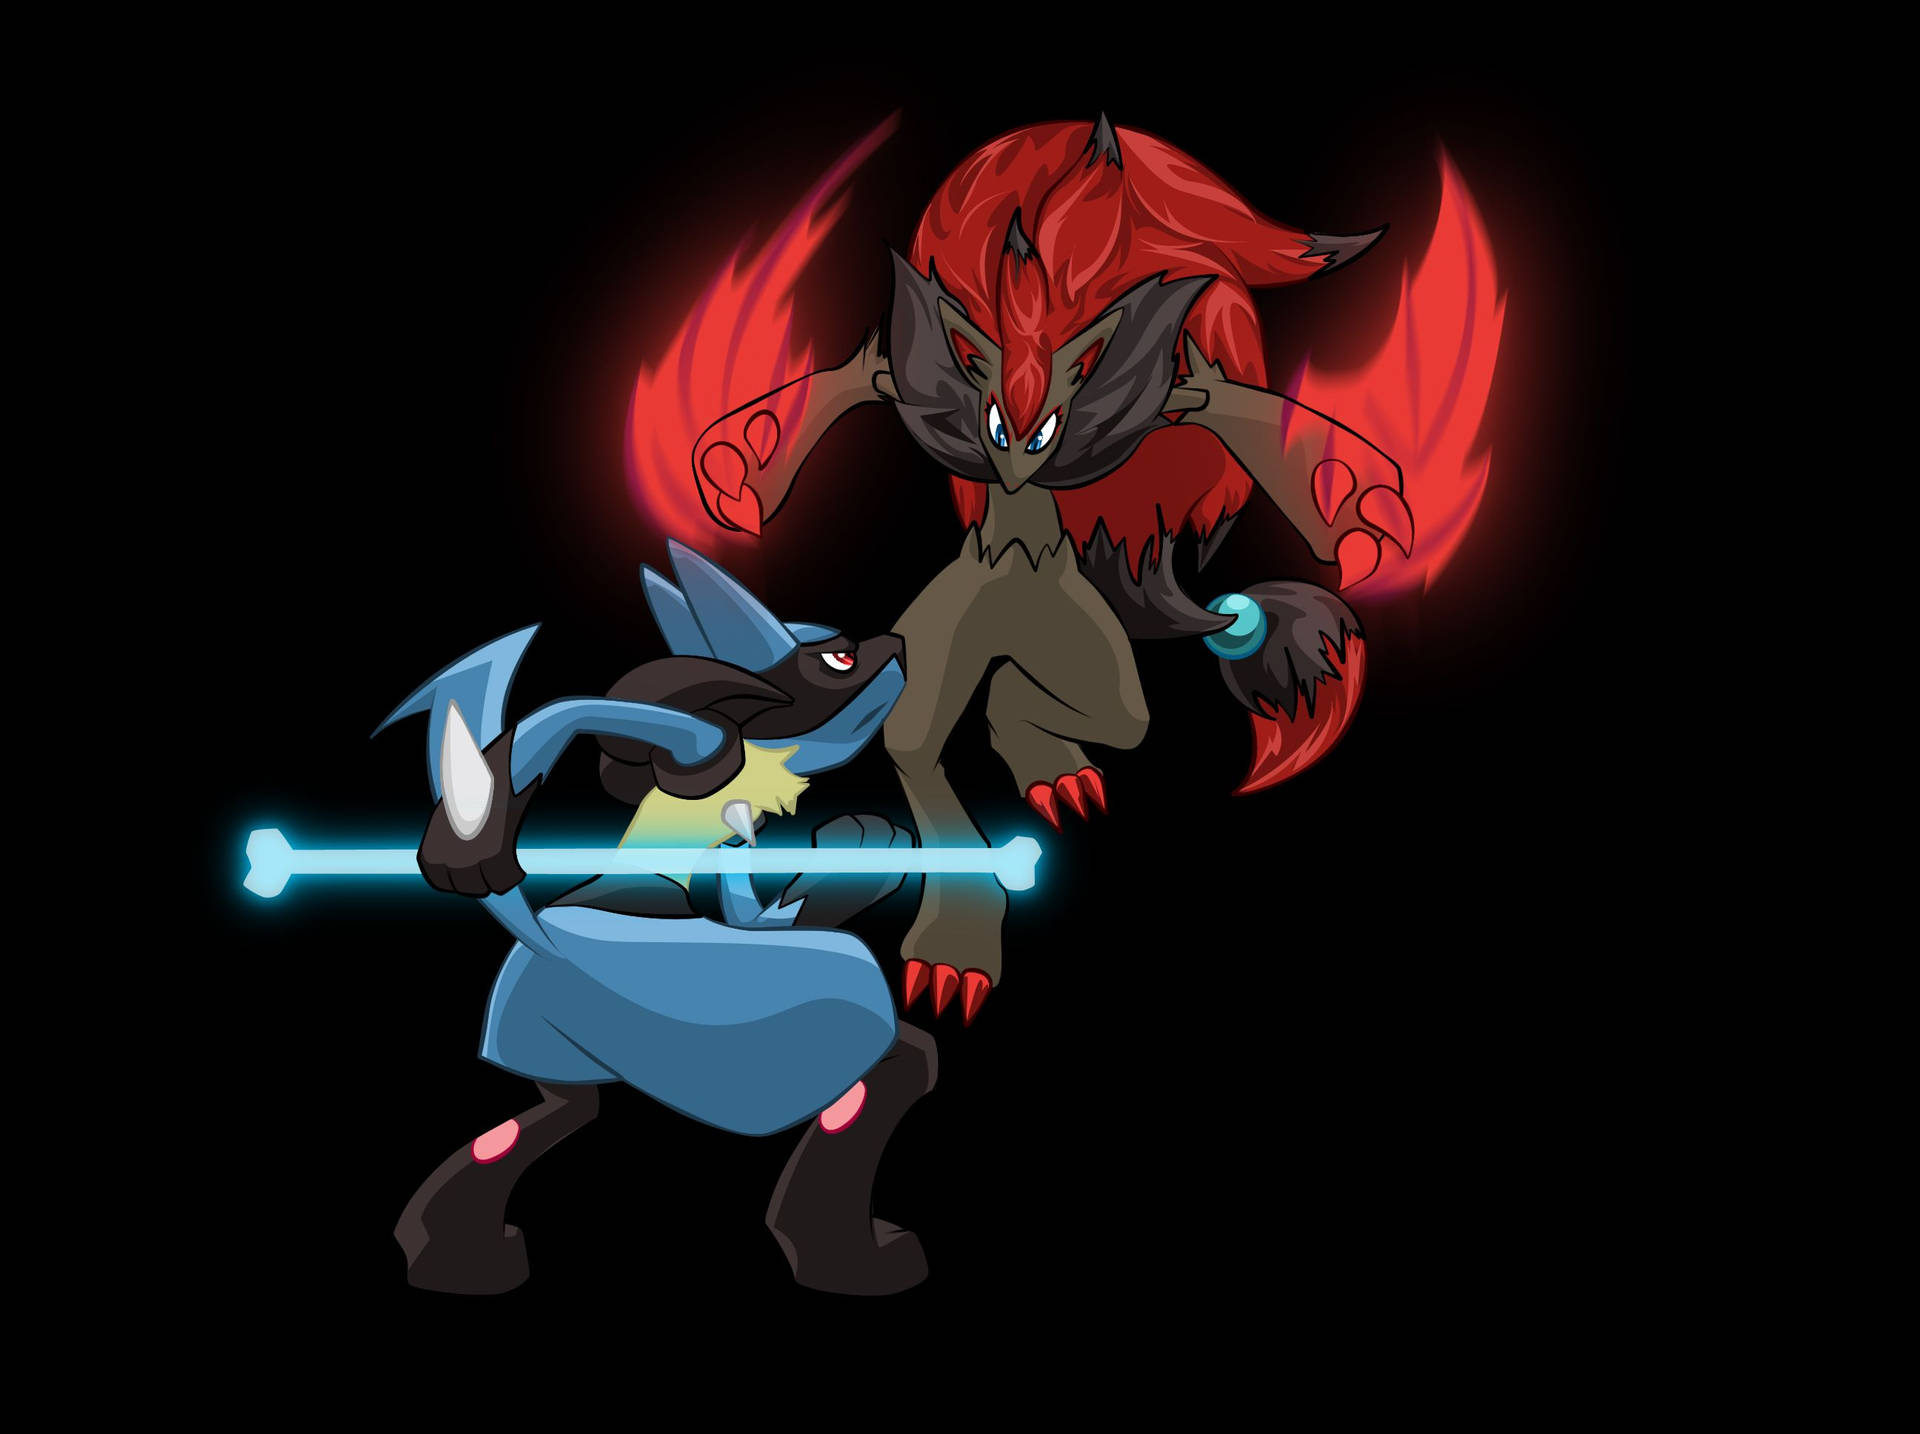 Get Ready For The Battle - Lucario In Fight Background